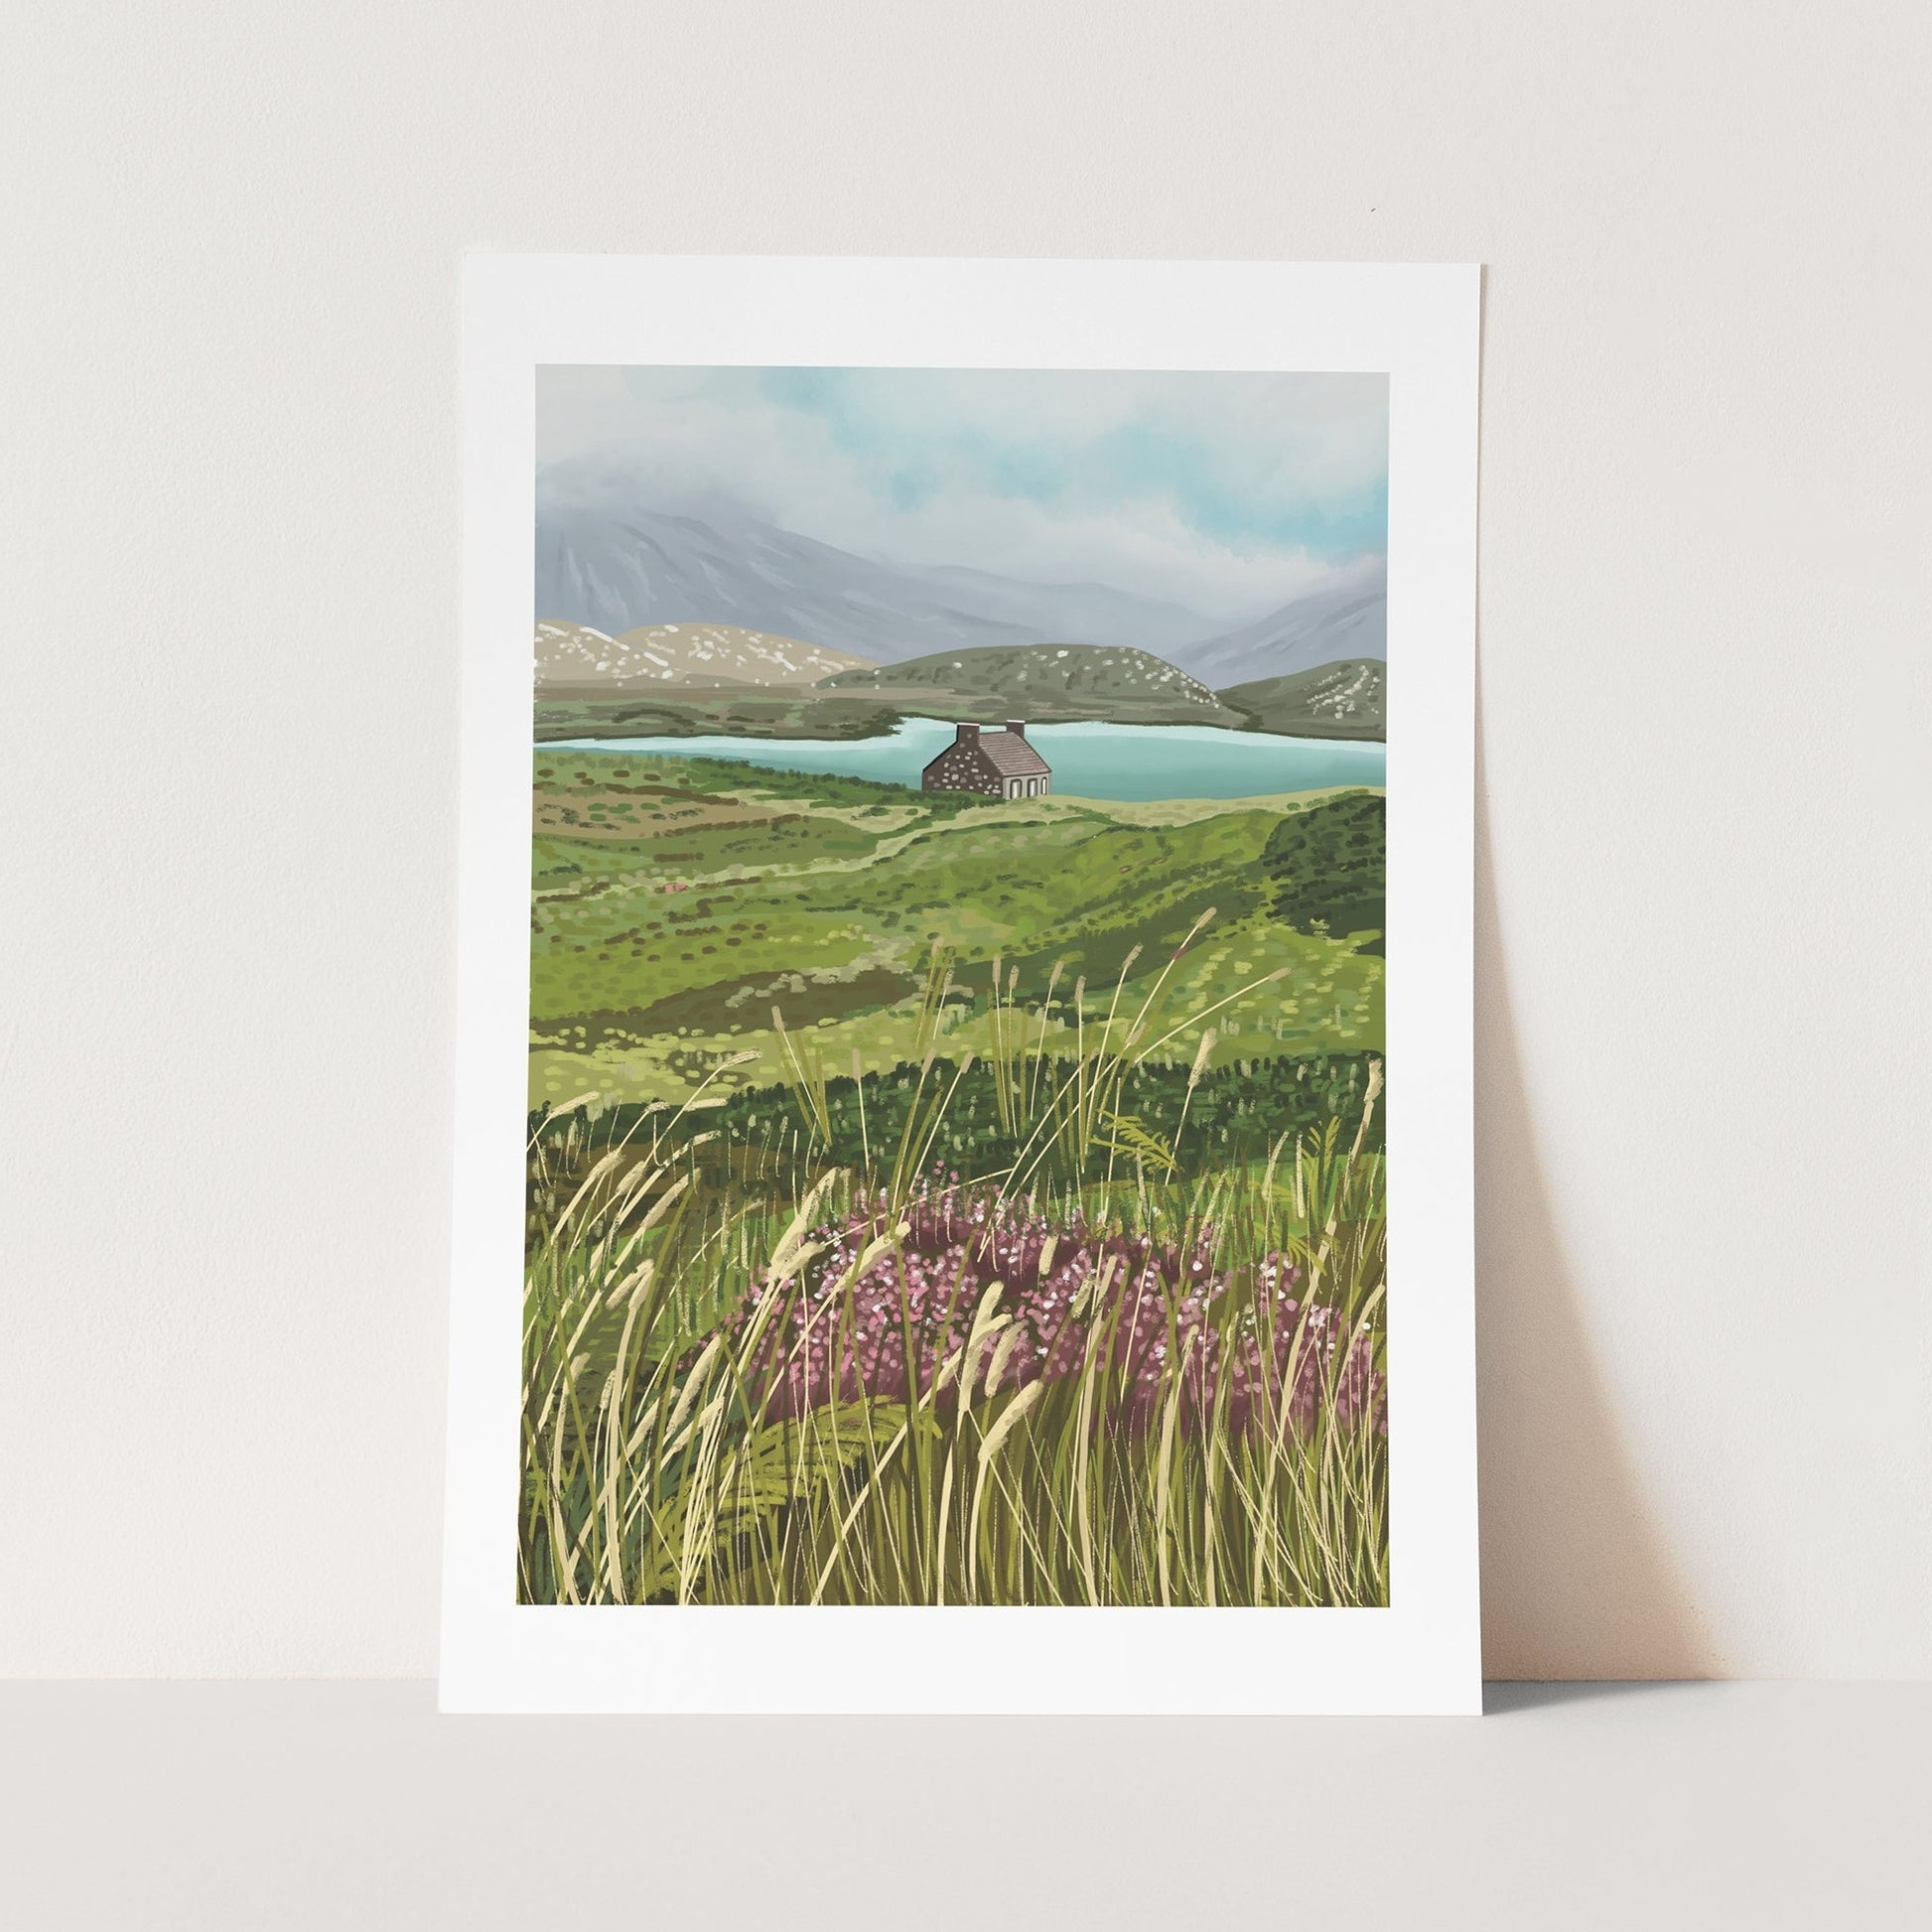 Print of a peaceful bothy nestled in the Scottish highlands from the Pencil Me In stationery shop.